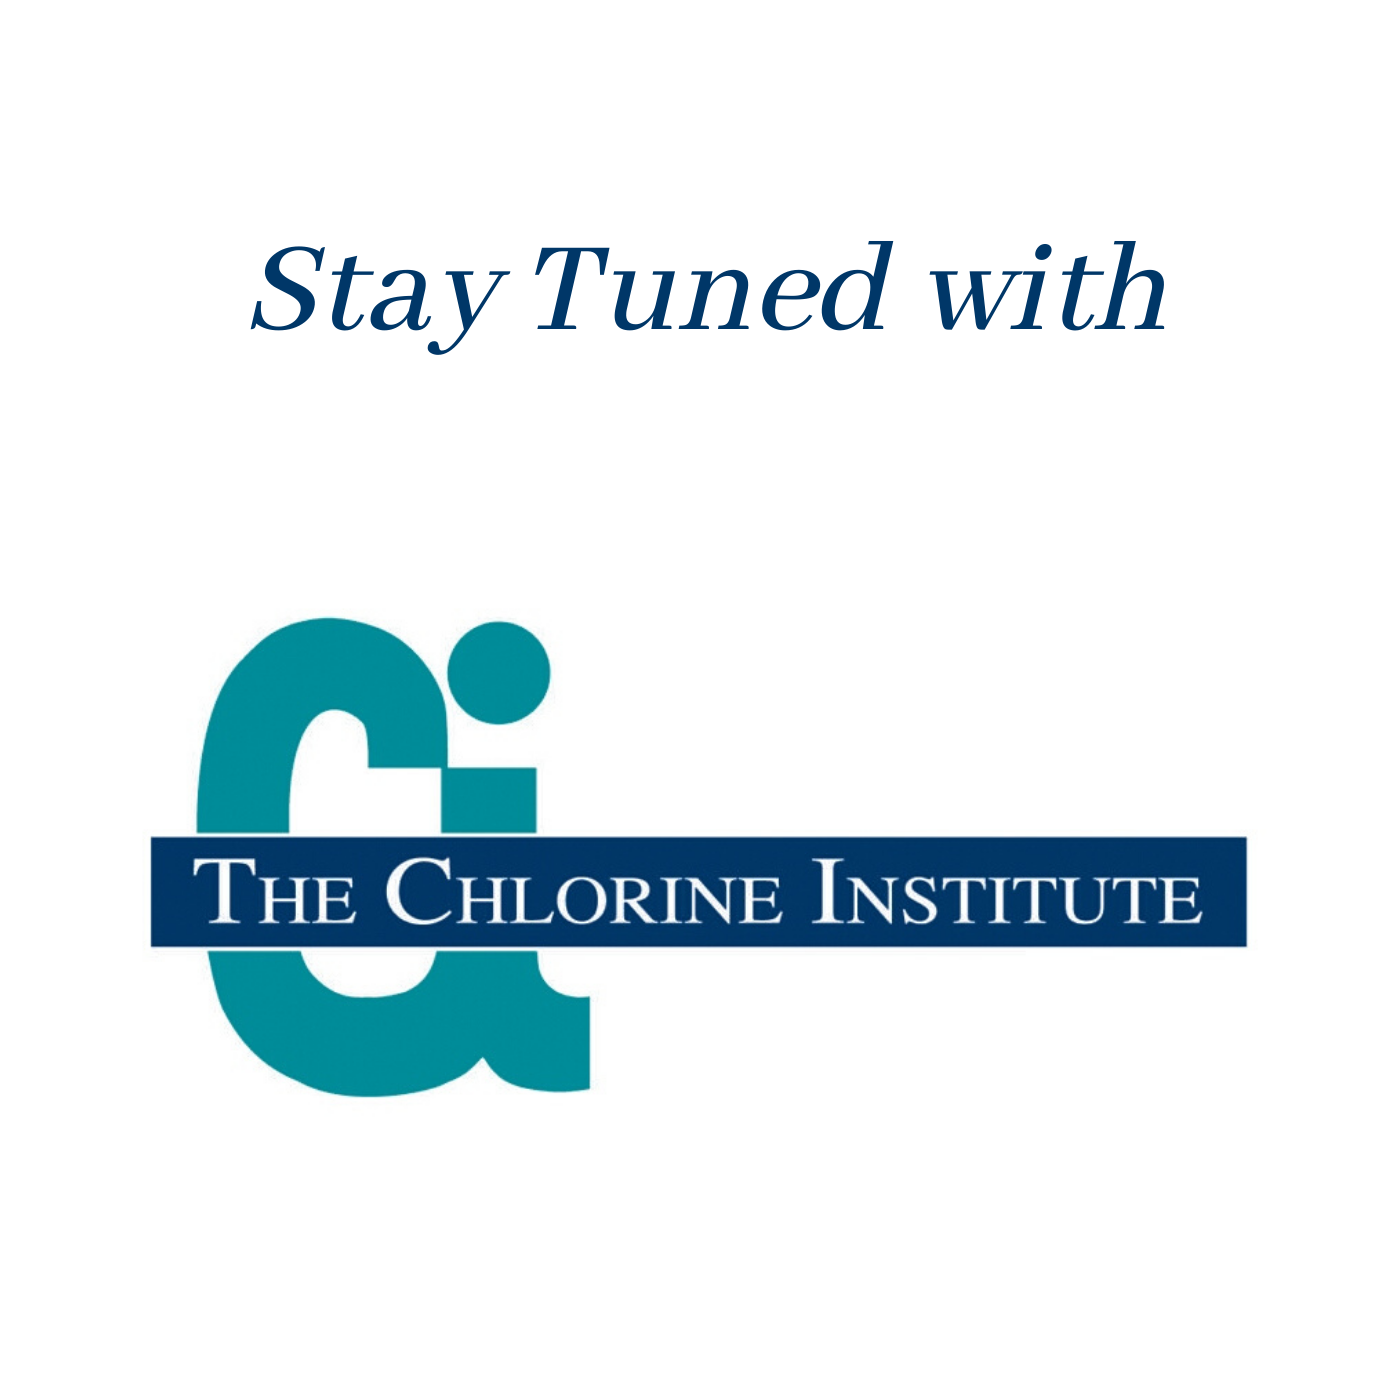 Stay Tuned with The Chlorine Institute